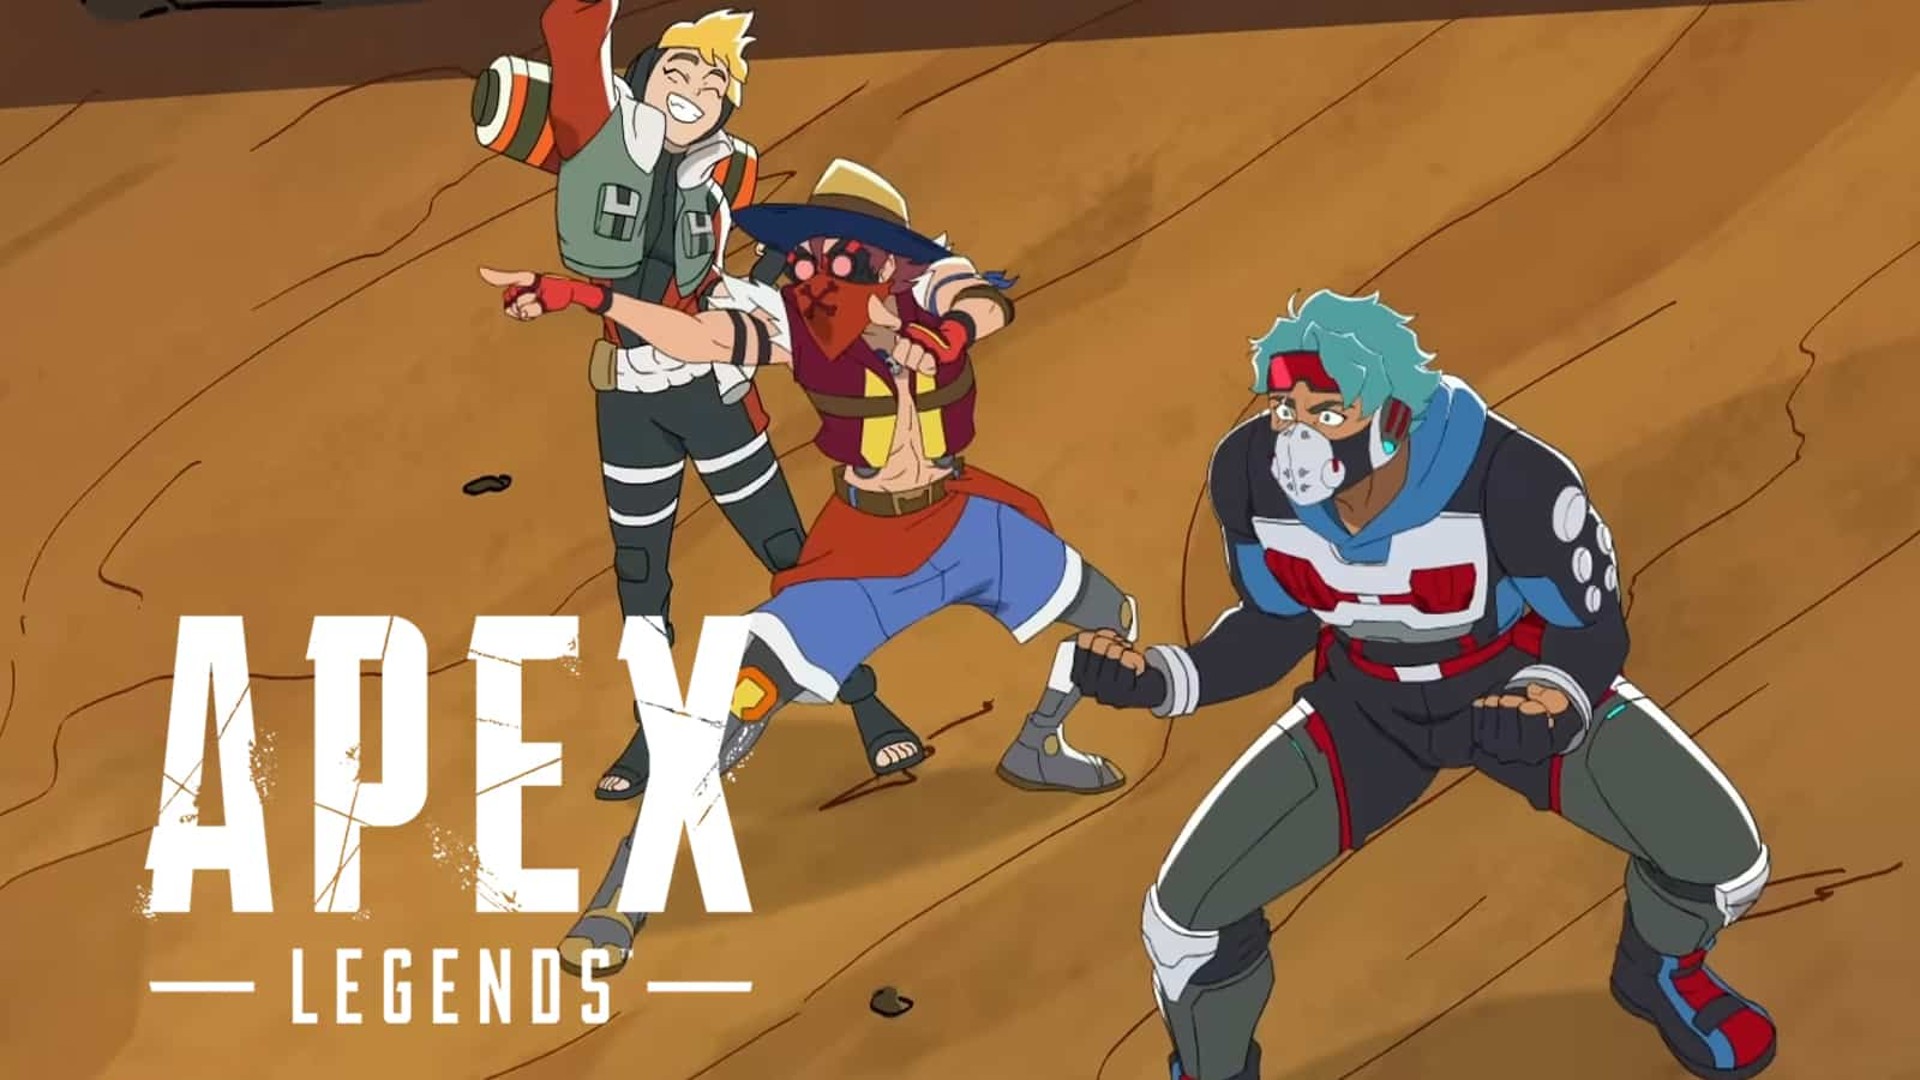 Apex Legends Sun Squad Collection Event: All upcoming legend skins, weapon  cosmetics, and Ash heirloom revealed in trailer